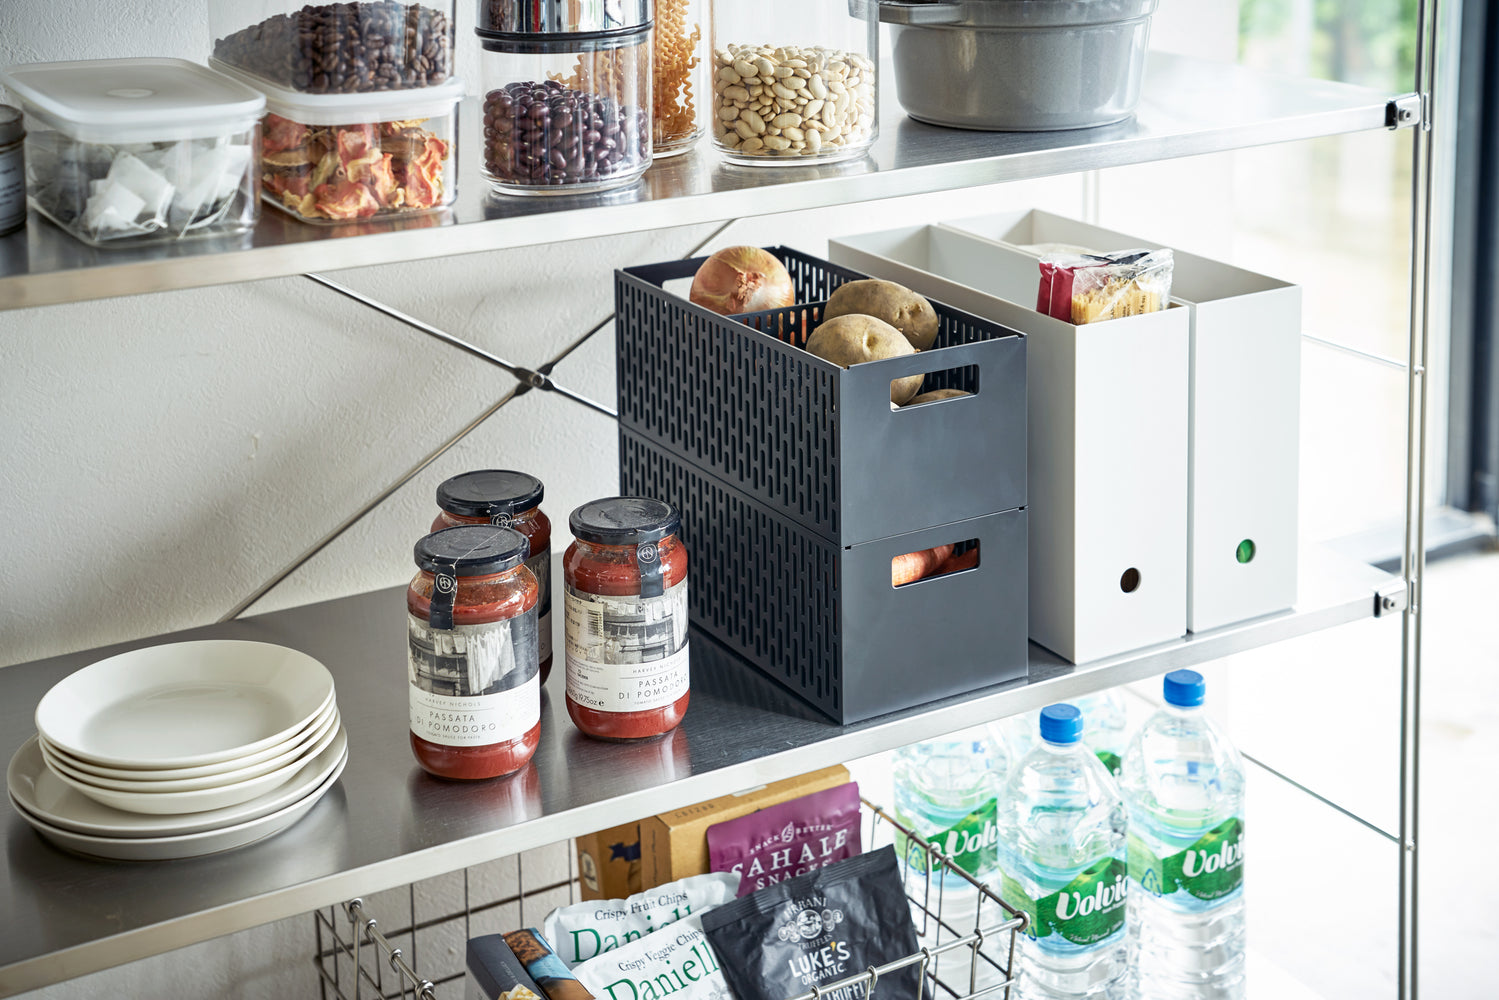 View 10 - Black Stackable Vegetable Stockers stacked and holding food items on kitchen pantry shelf by Yamazaki Home.